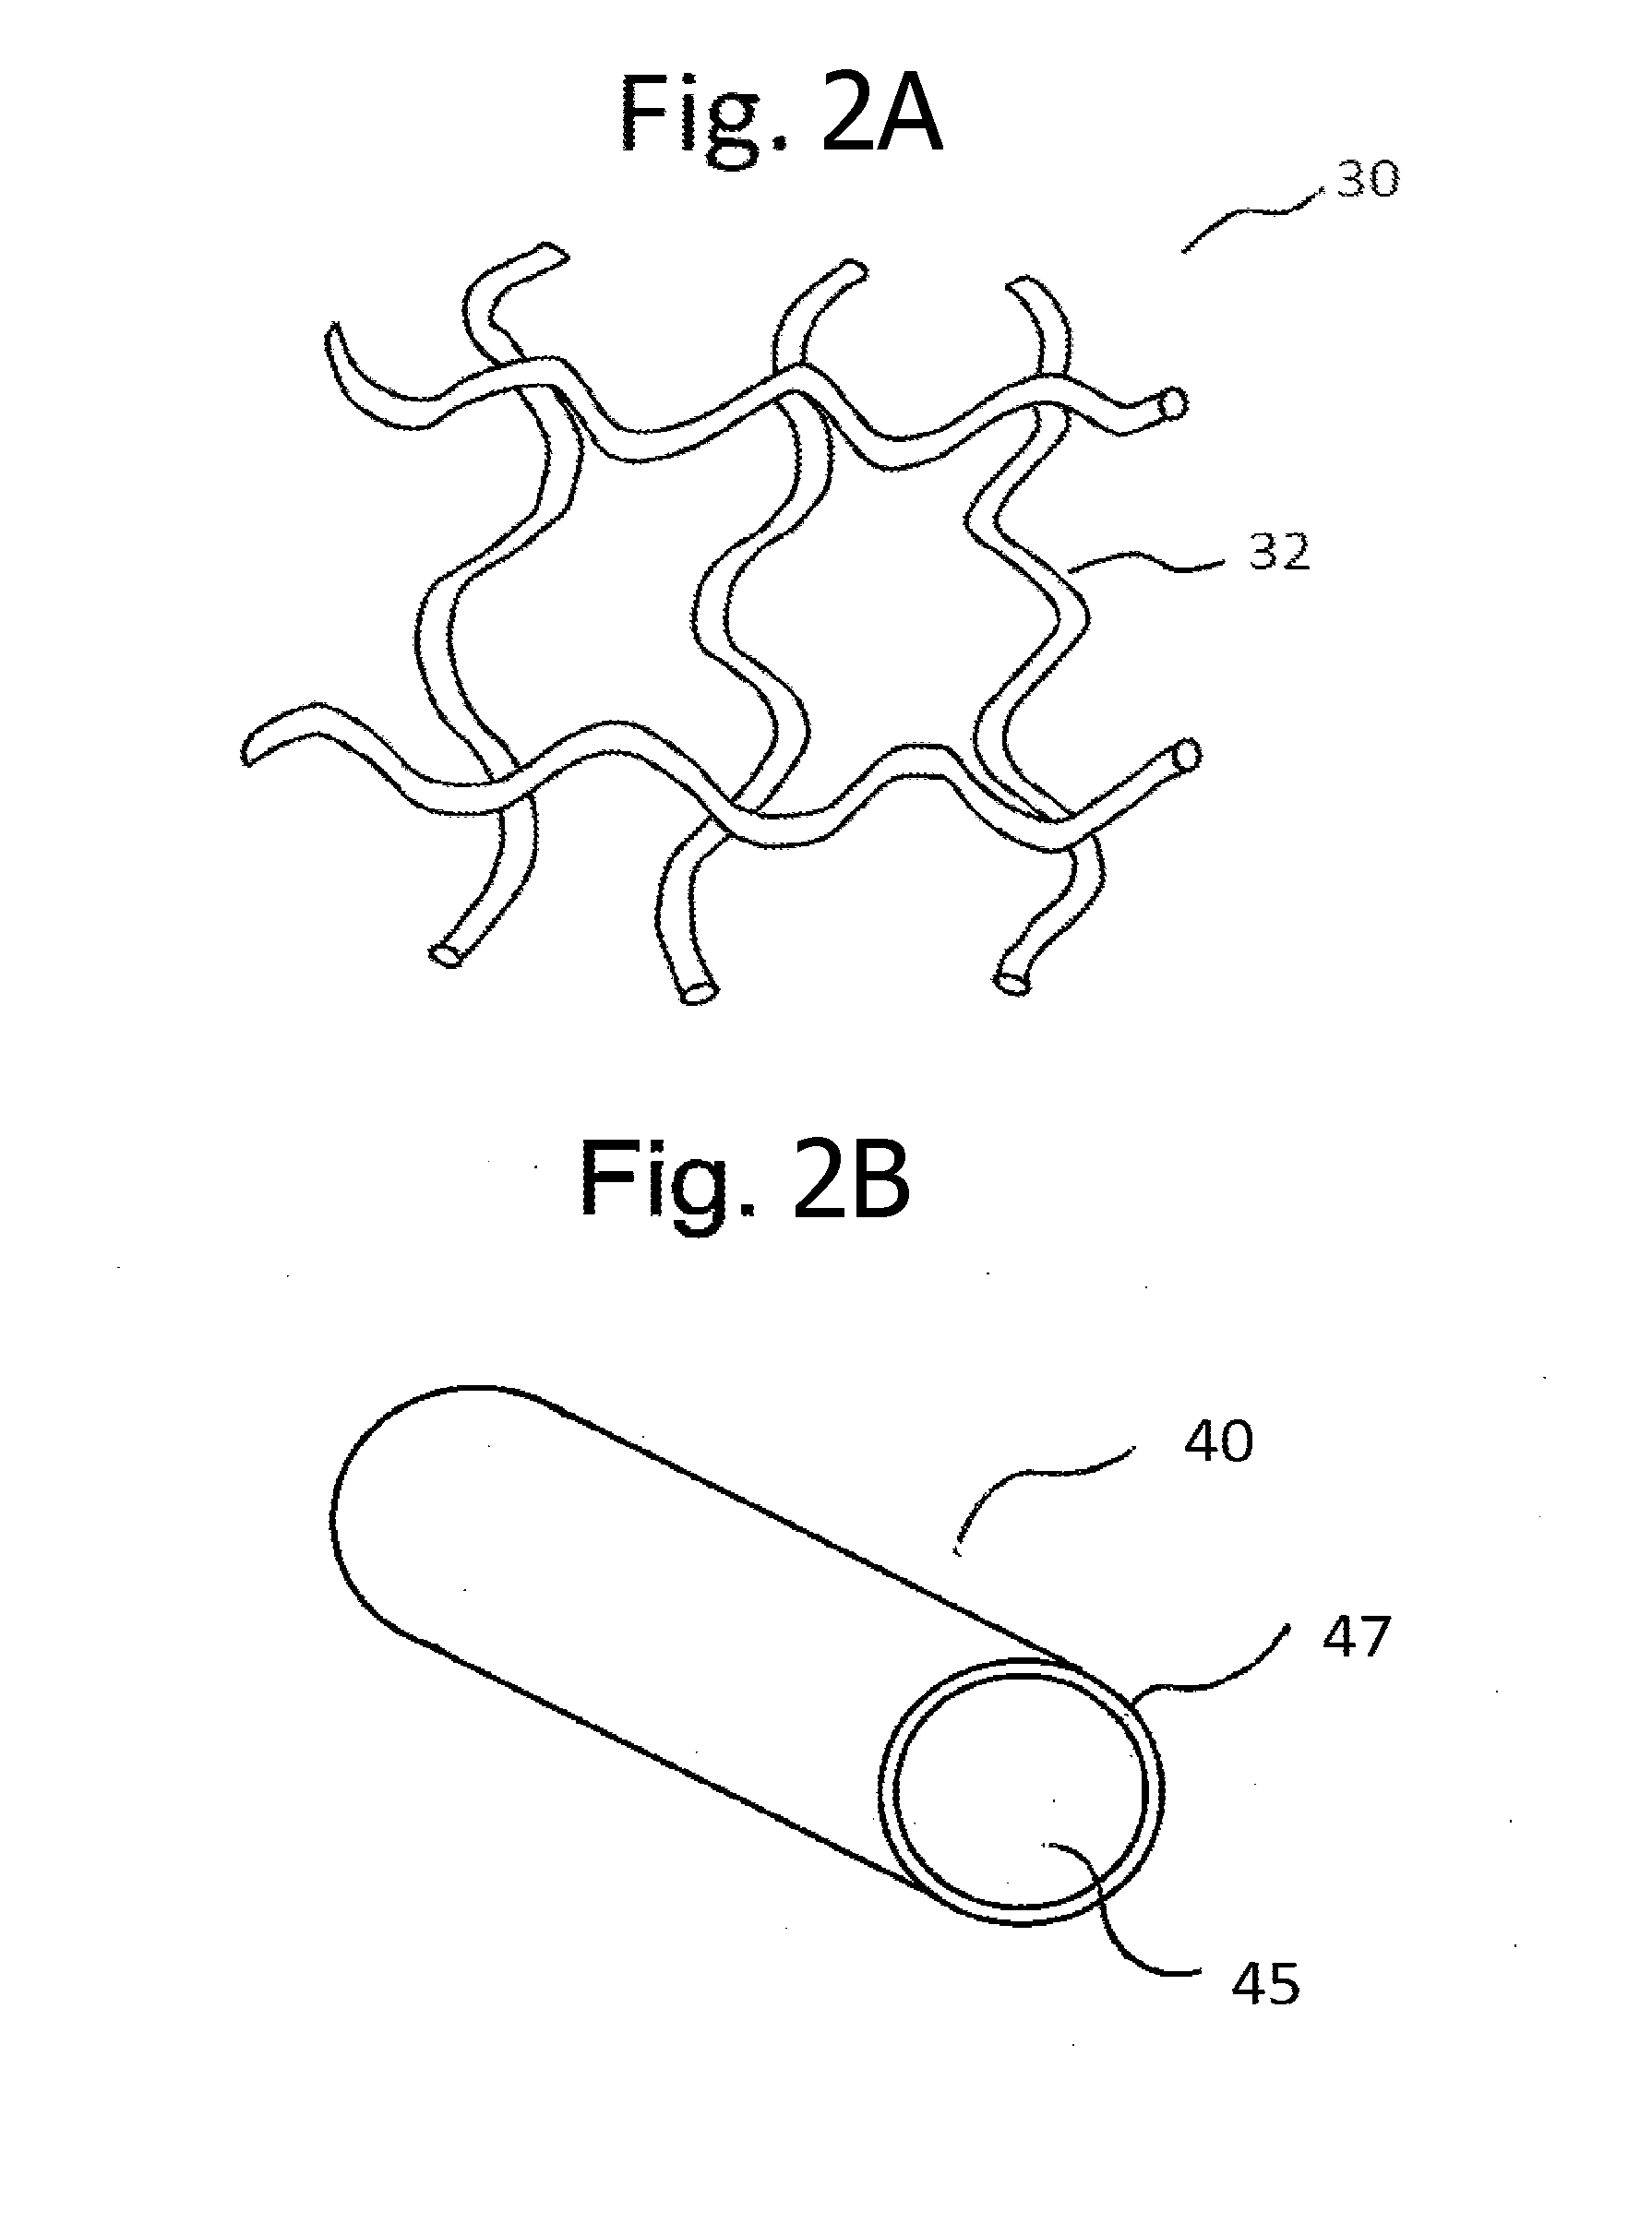 Biodegradable articles and methods for treatment of pelvic floor disorders including extracellular matrix material